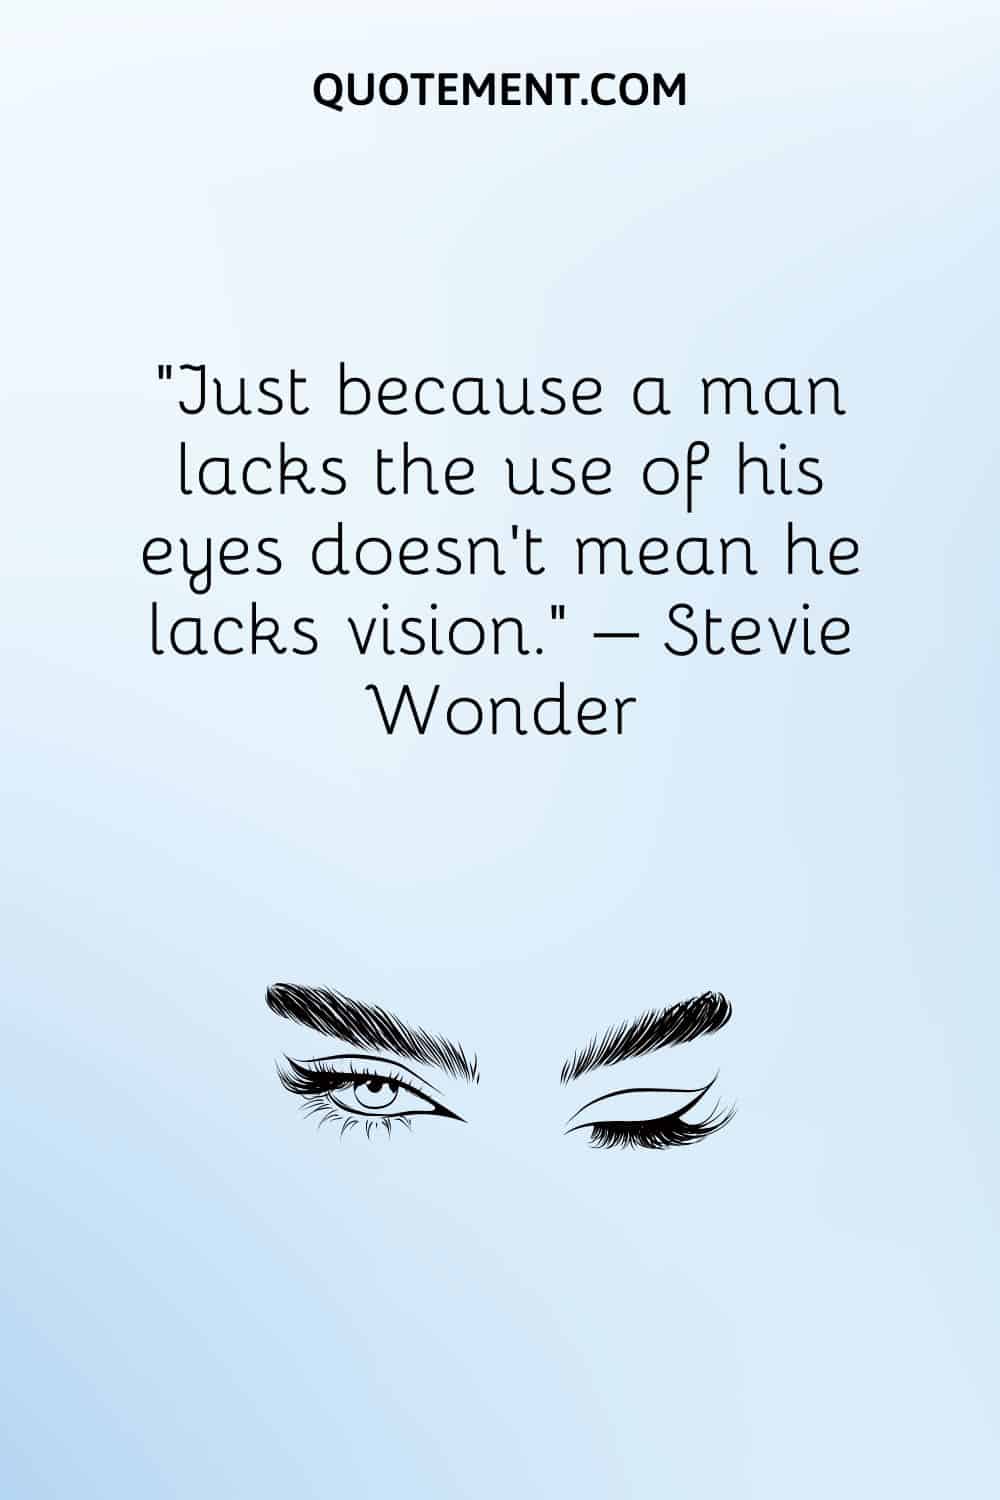 Just because a man lacks the use of his eyes doesn’t mean he lacks vision